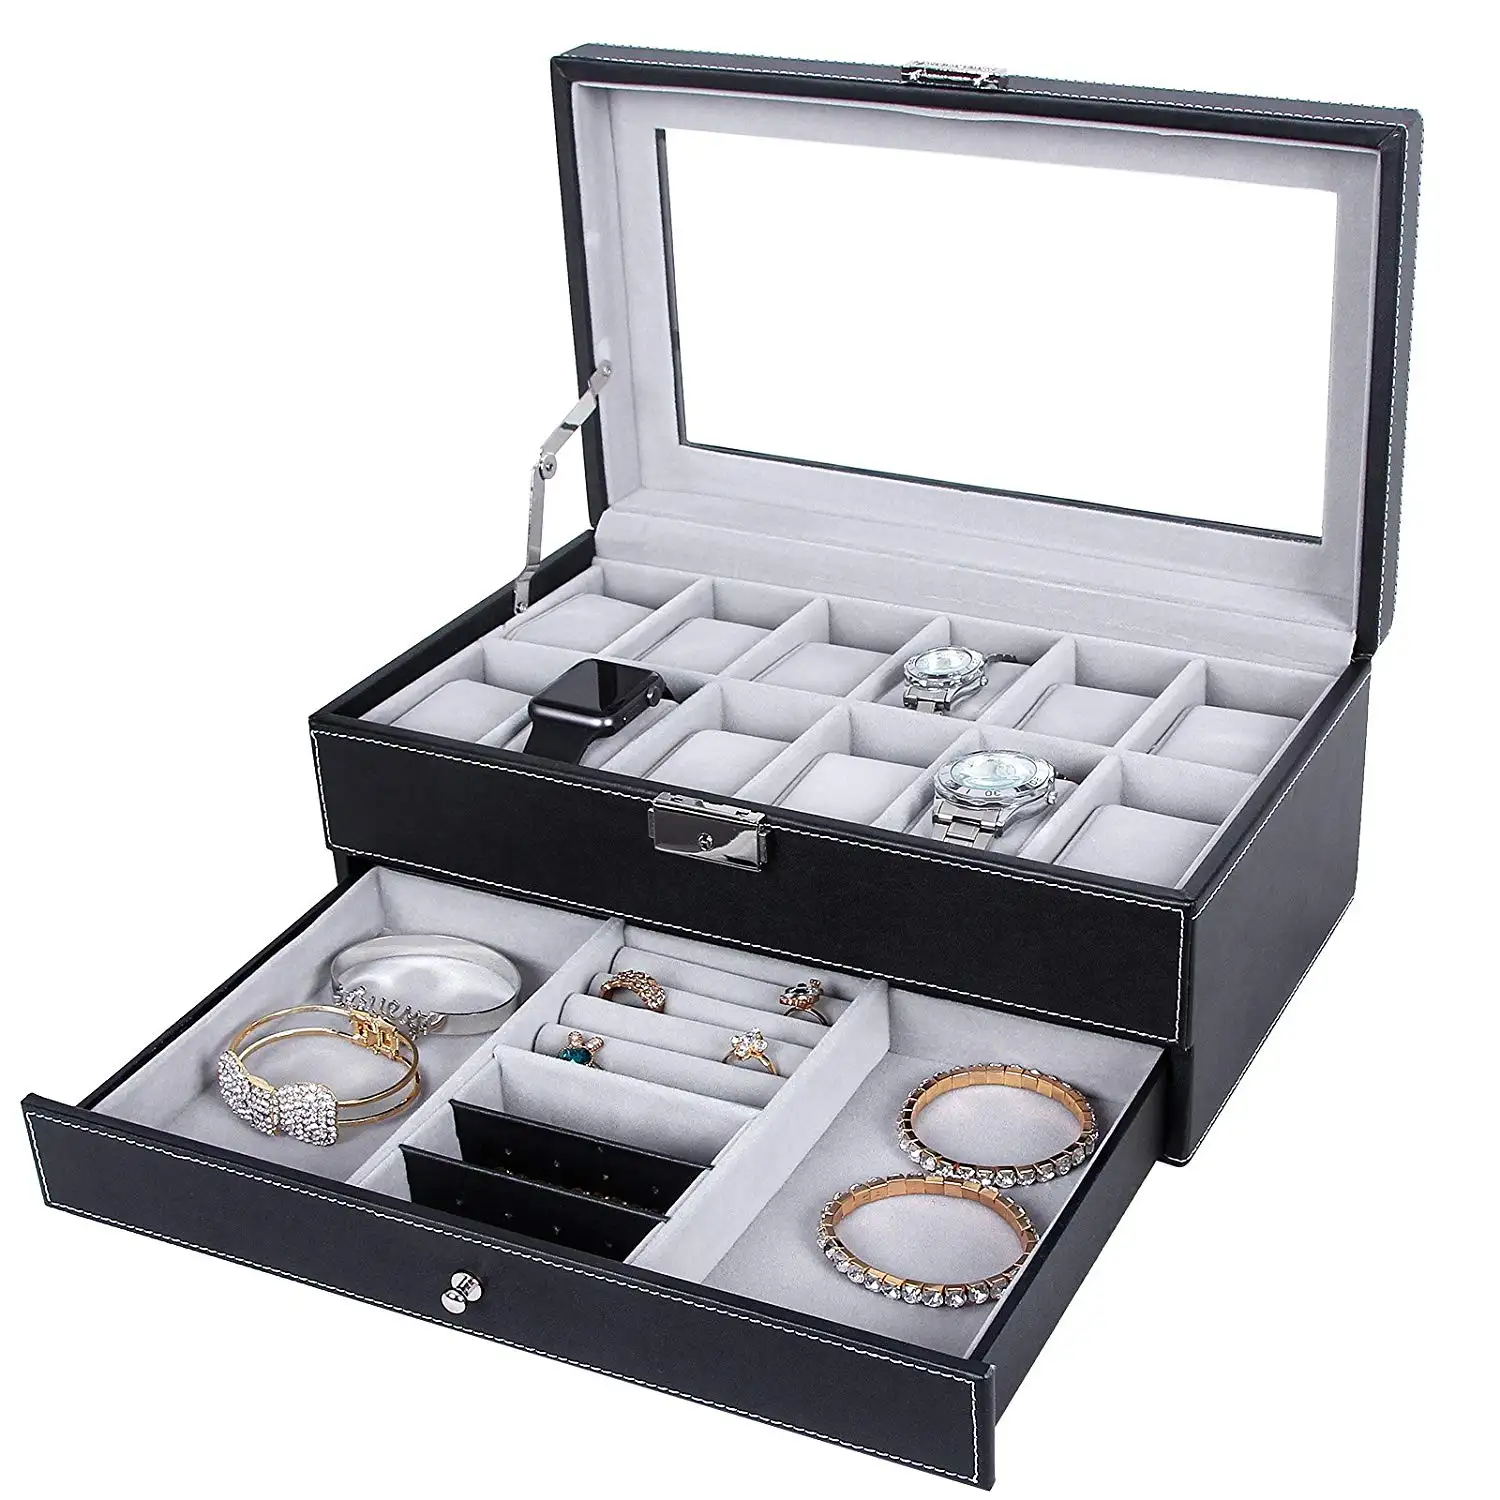 Organizer for Jewelry Watch Box Sunglass Organizer with Real Glass Top 12 Watch Case for Men Glass Box Storage Boxes